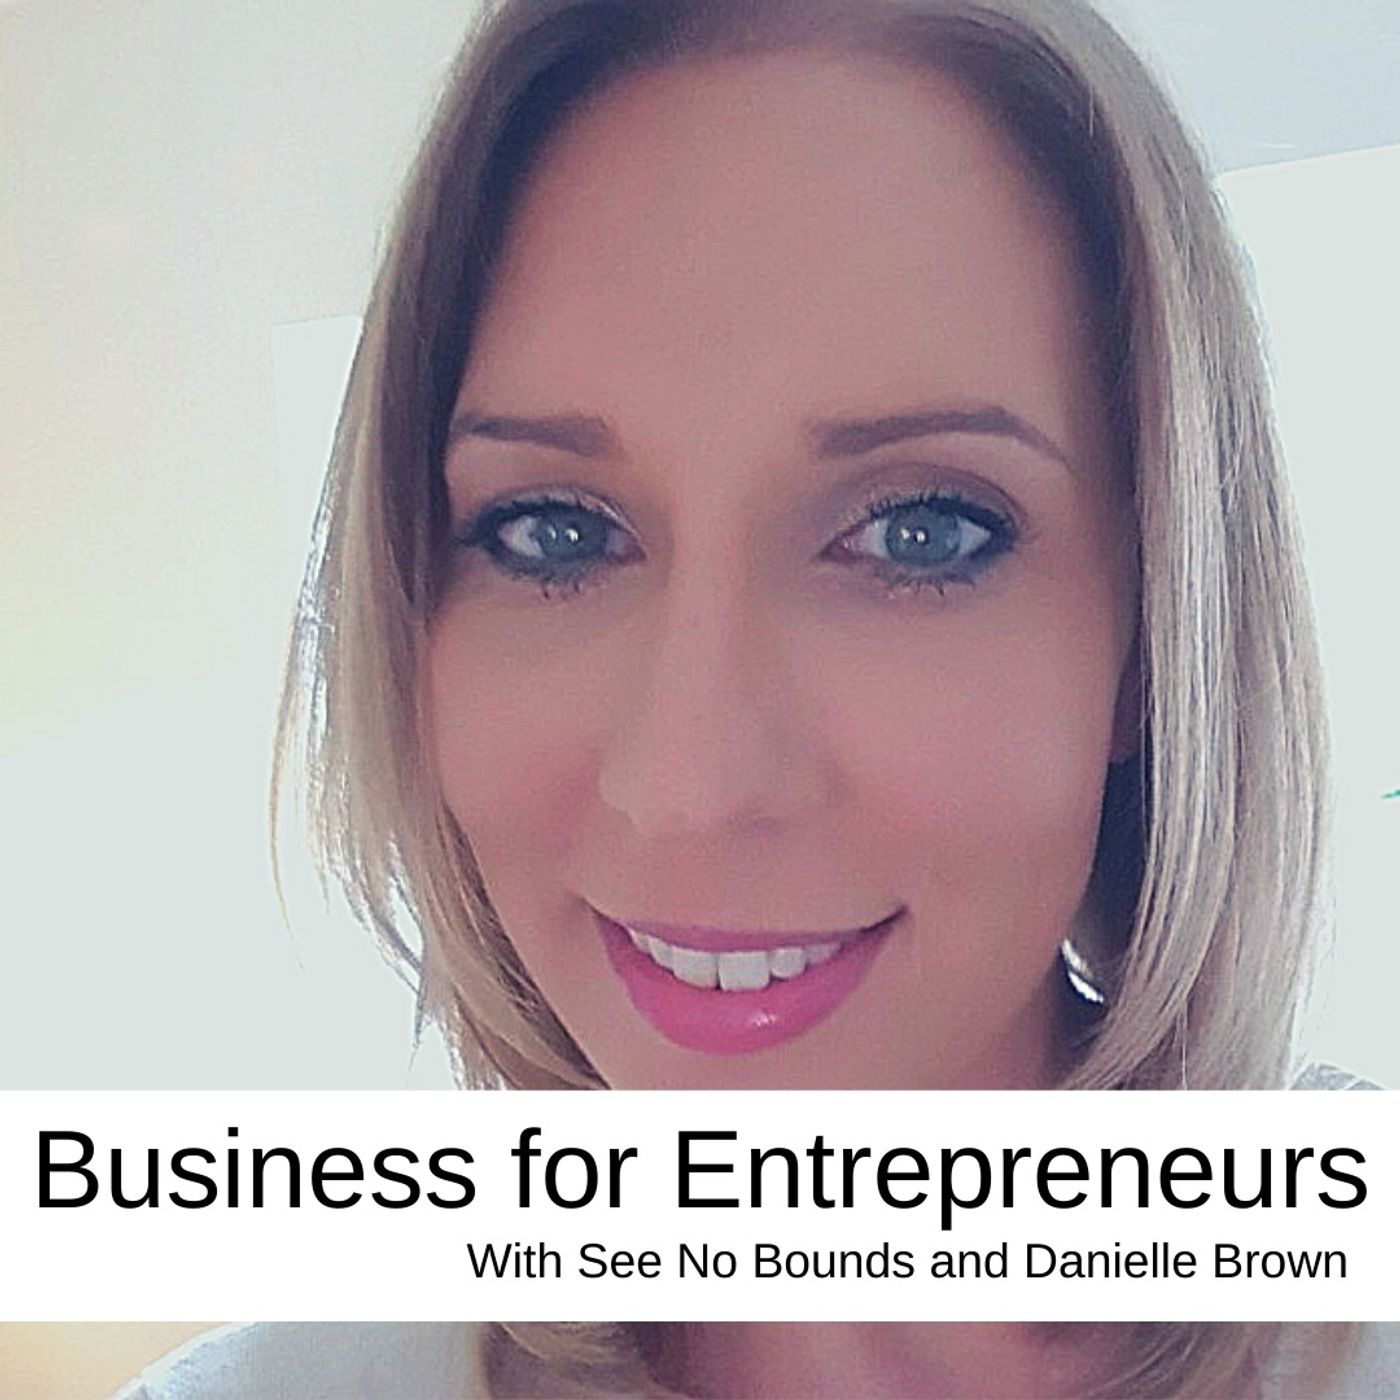 Business for Entrepreneurs with Danielle Brown